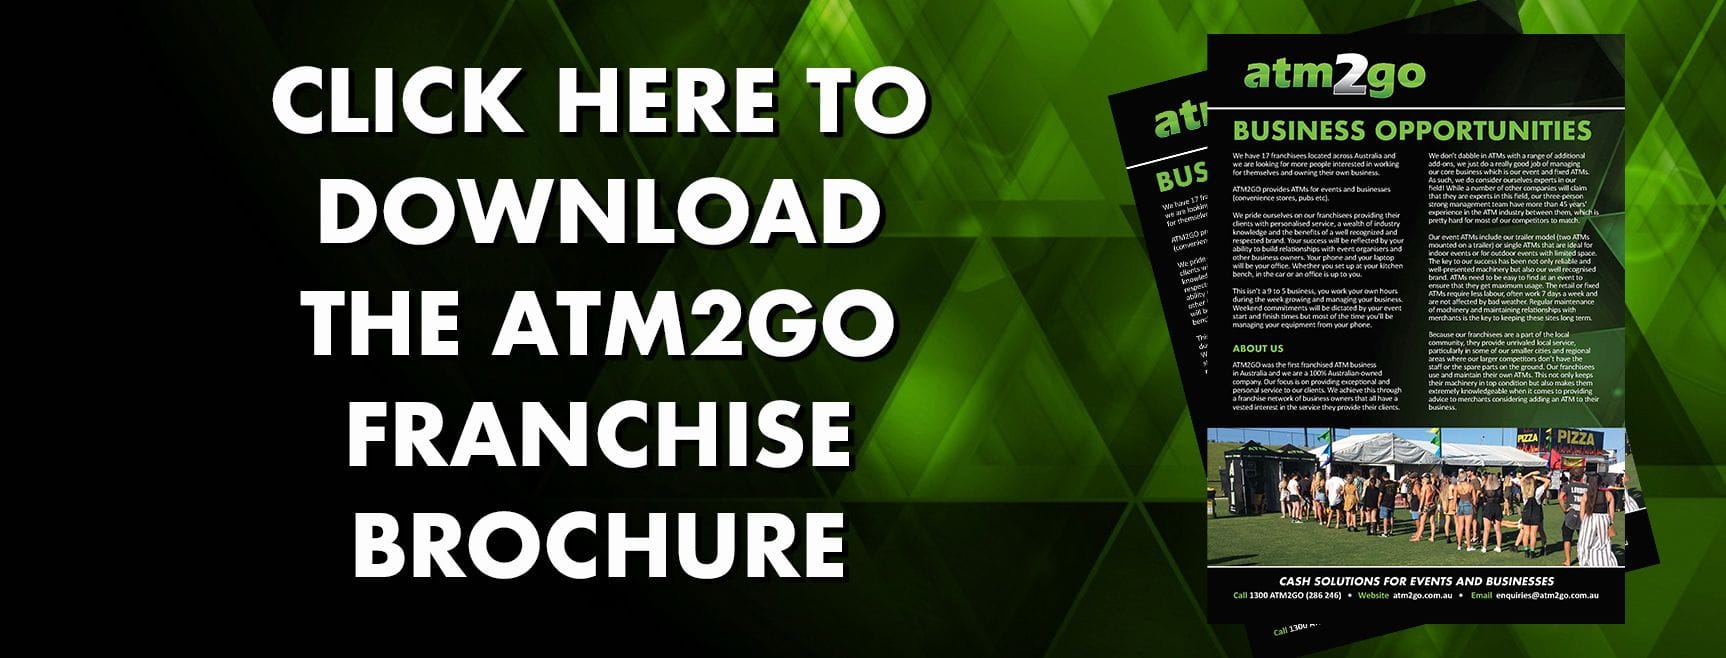 click here to download franchise brochure